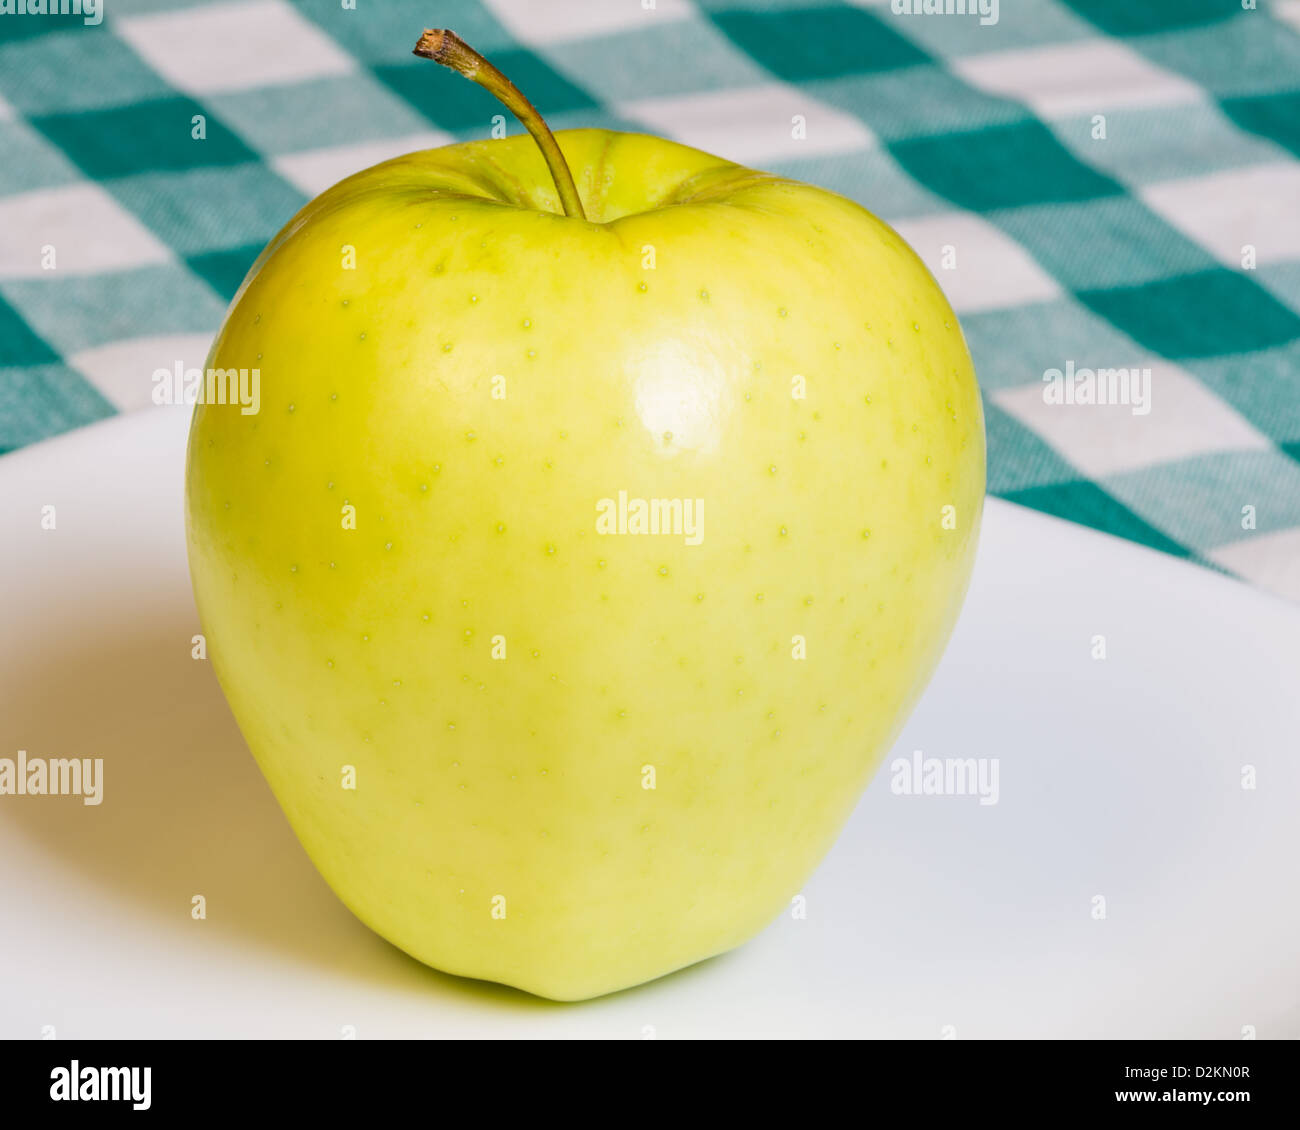 Fresh Golden Delicious apple on a white plate Stock Photo